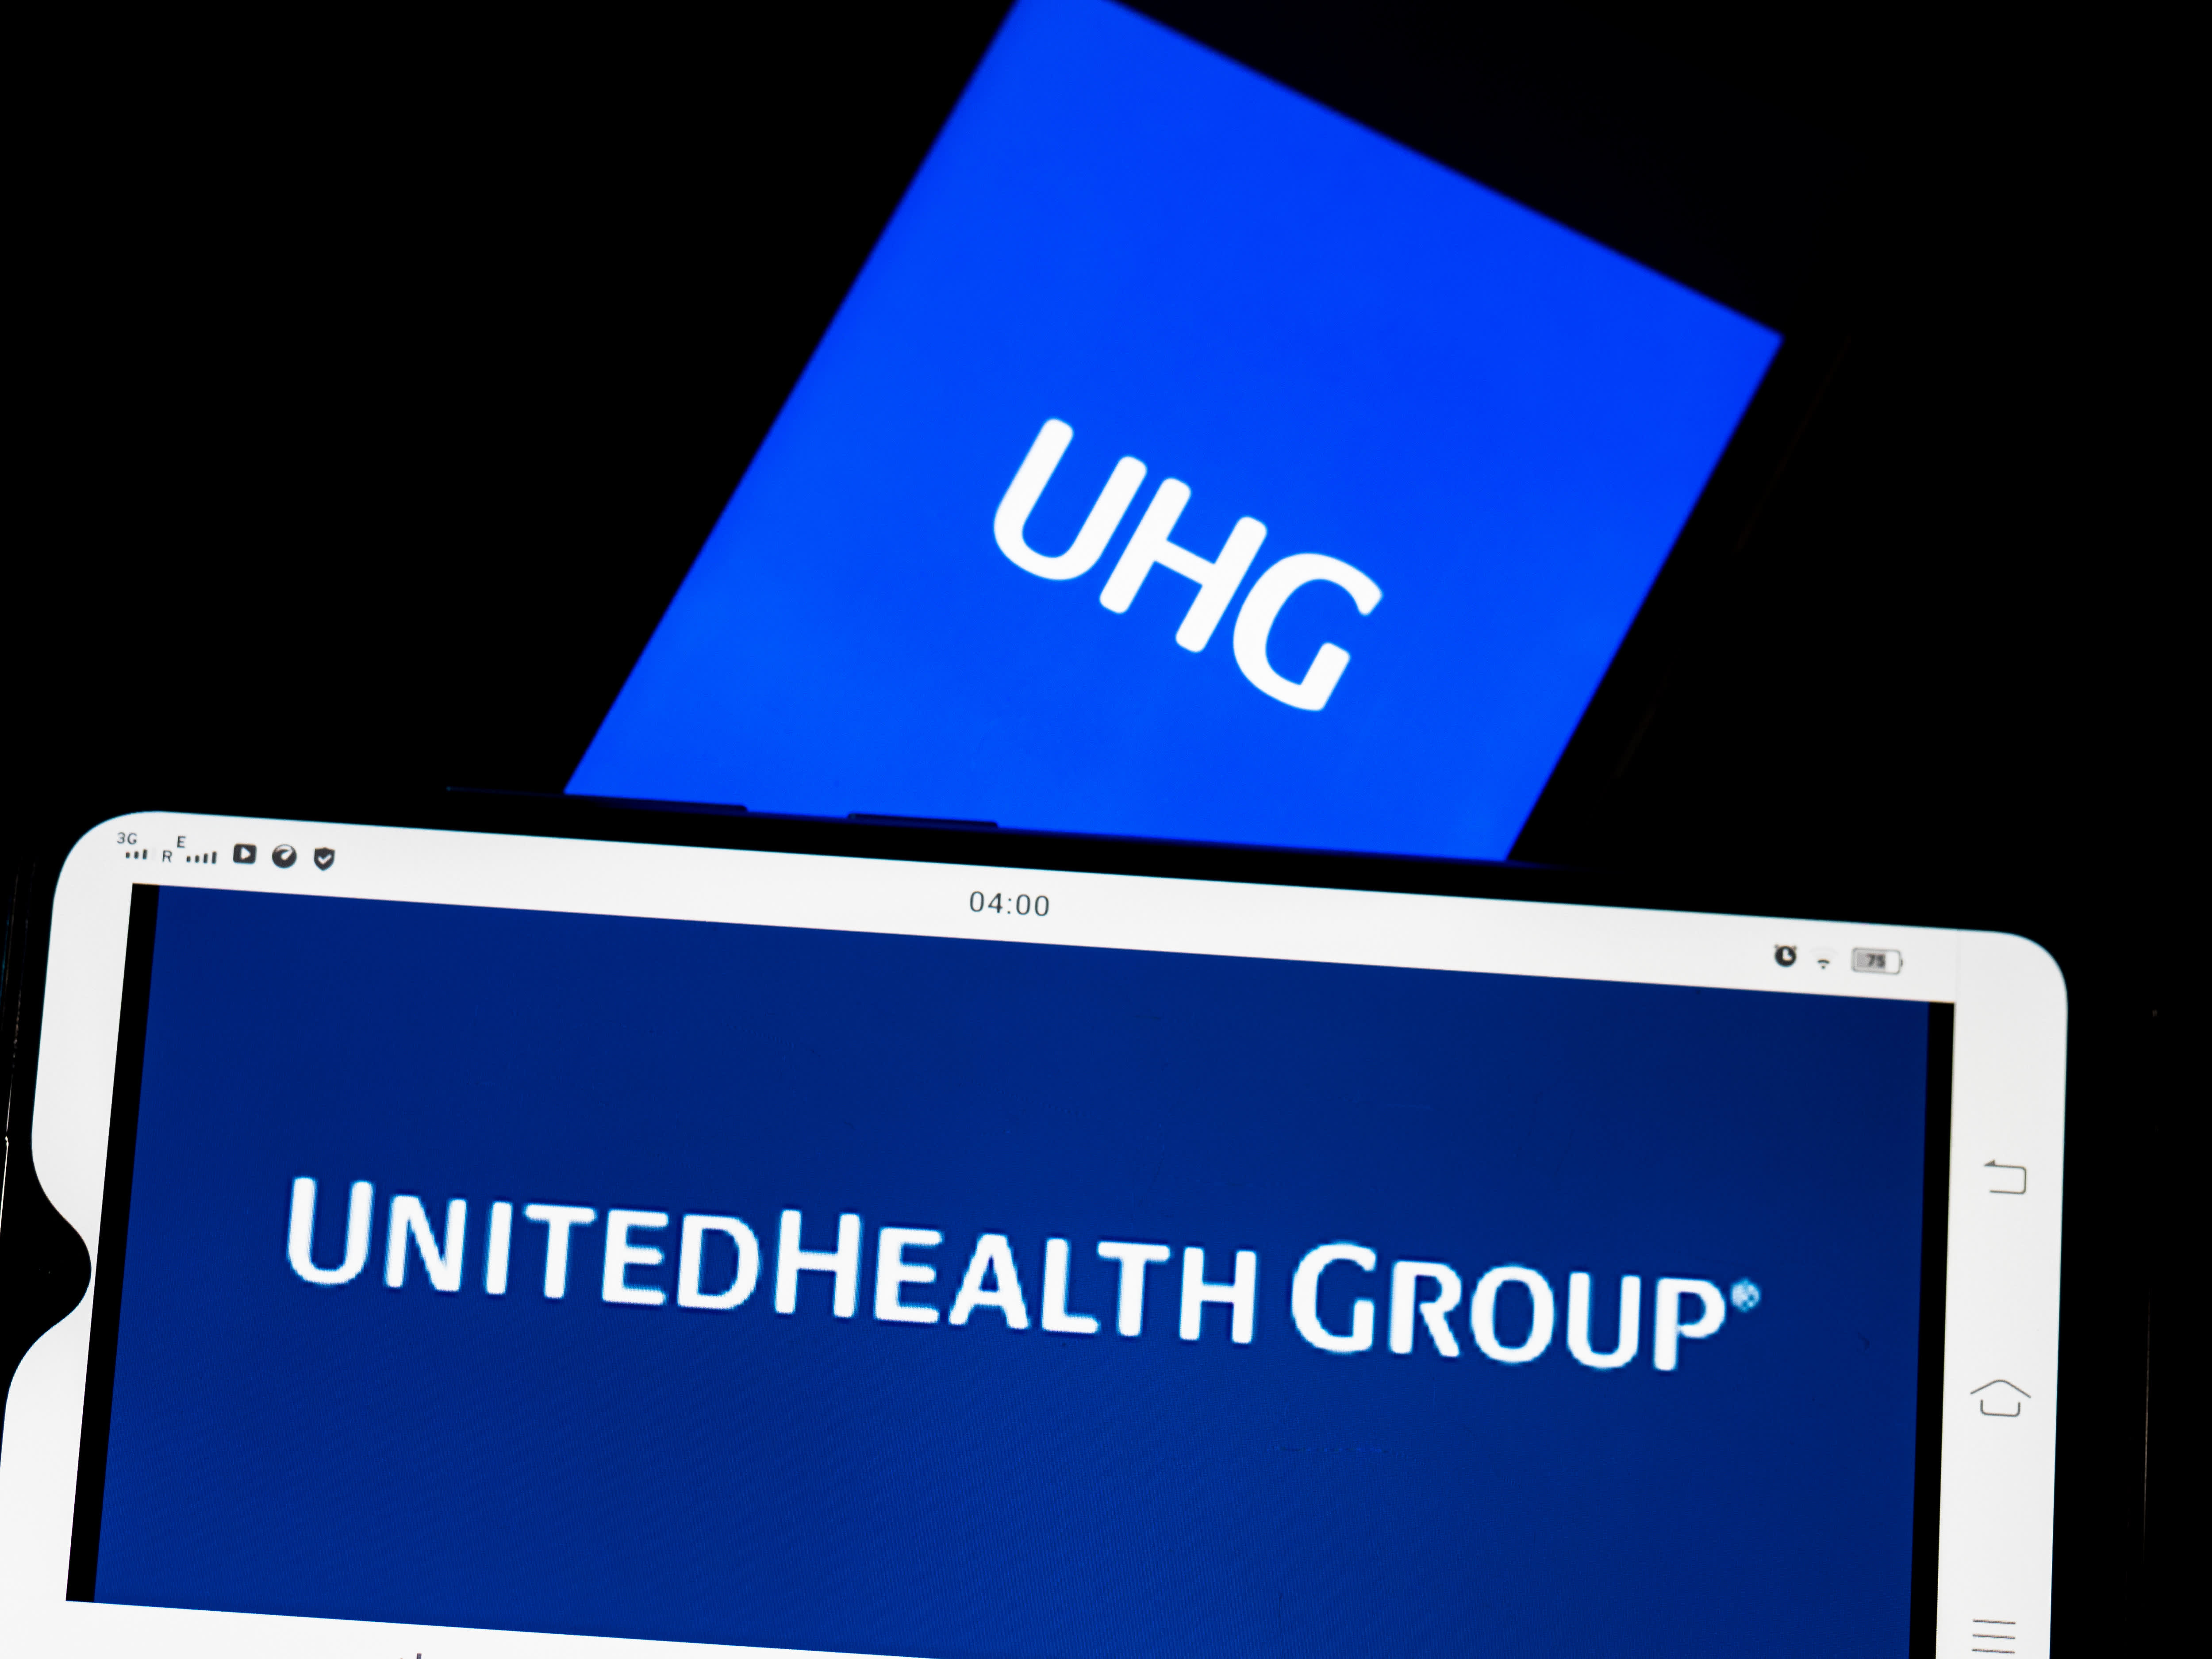 Patient data compromised, UnitedHealth pays ransom to malicious actors